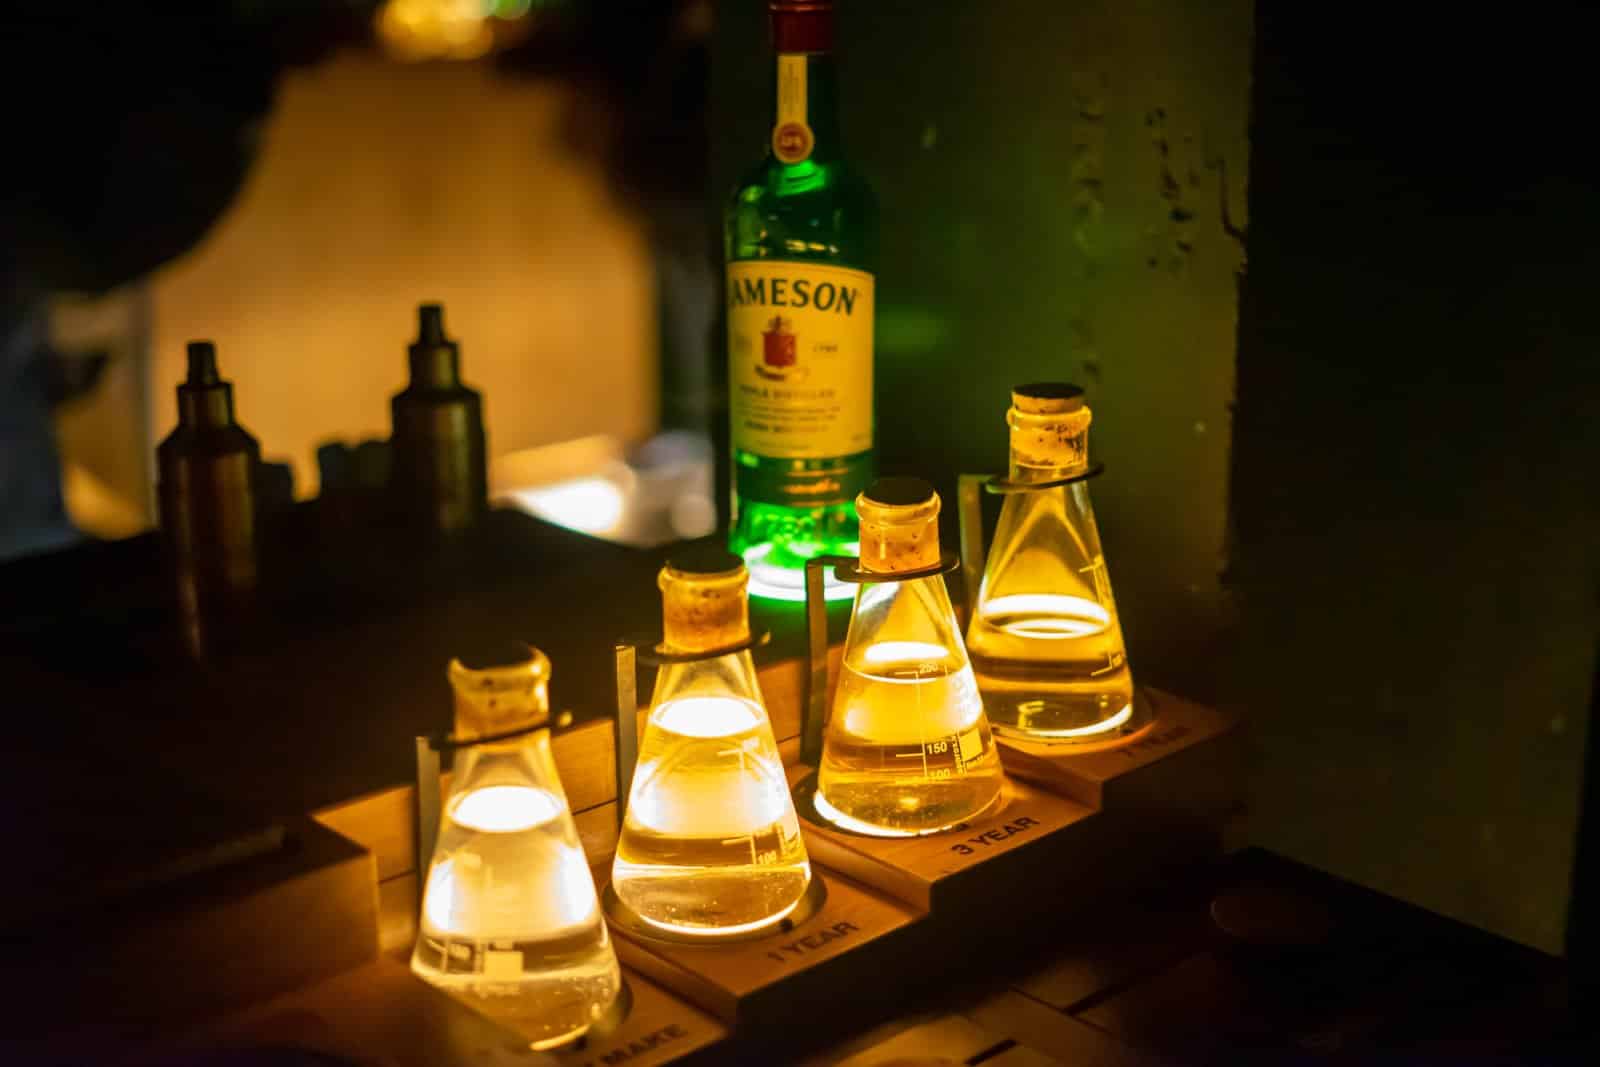 <p class="wp-caption-text">Image Credit: Shutterstock / Marcin Piwowarczyk</p>  <p><span>While not a beer destination, the Jameson Distillery on Bow St. offers insight into another facet of Dublin’s storied relationship with alcohol. The distillery provides a captivating experience that delves into Jameson whiskey’s history, production, and tasting. The guided tour is both educational and engaging, culminating in a comparative whiskey tasting that highlights the distinctive qualities of Jameson.</span></p>